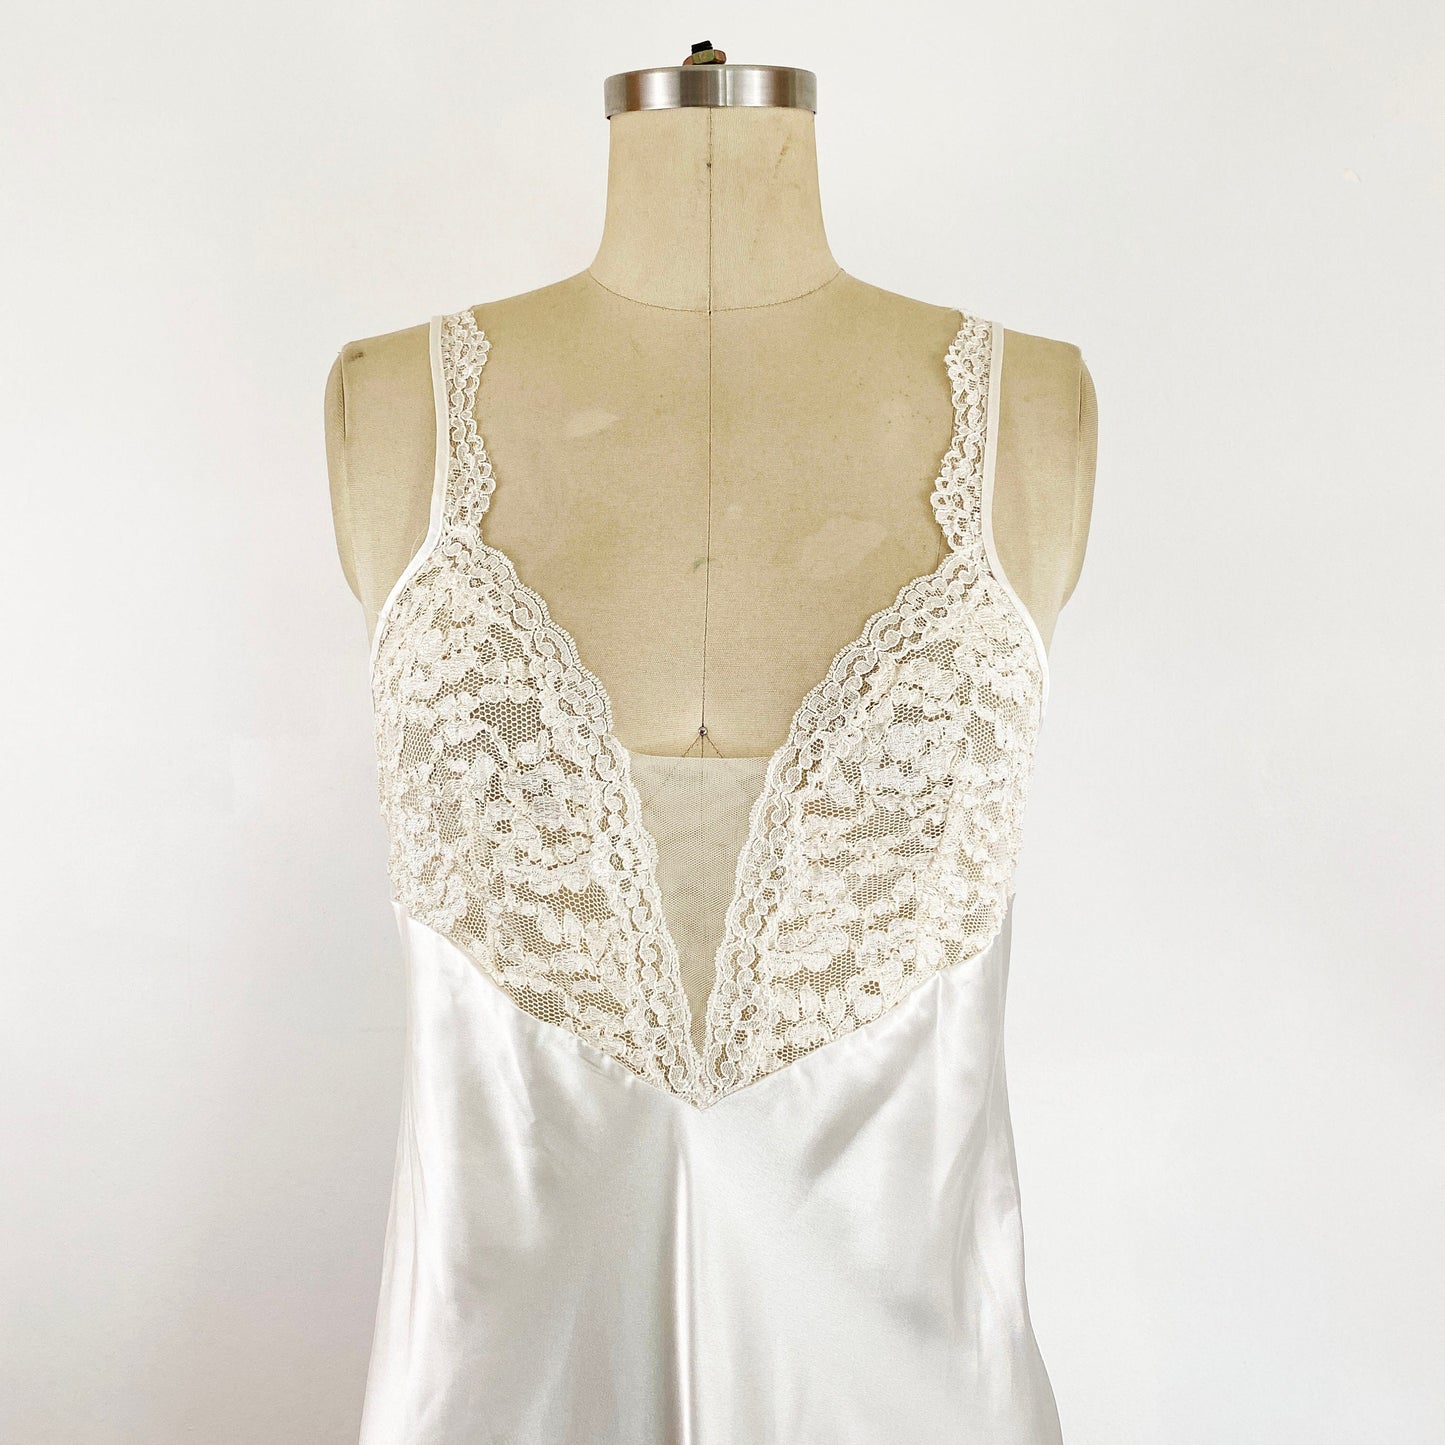 Vintage Ivory/White Lace Negligee - M